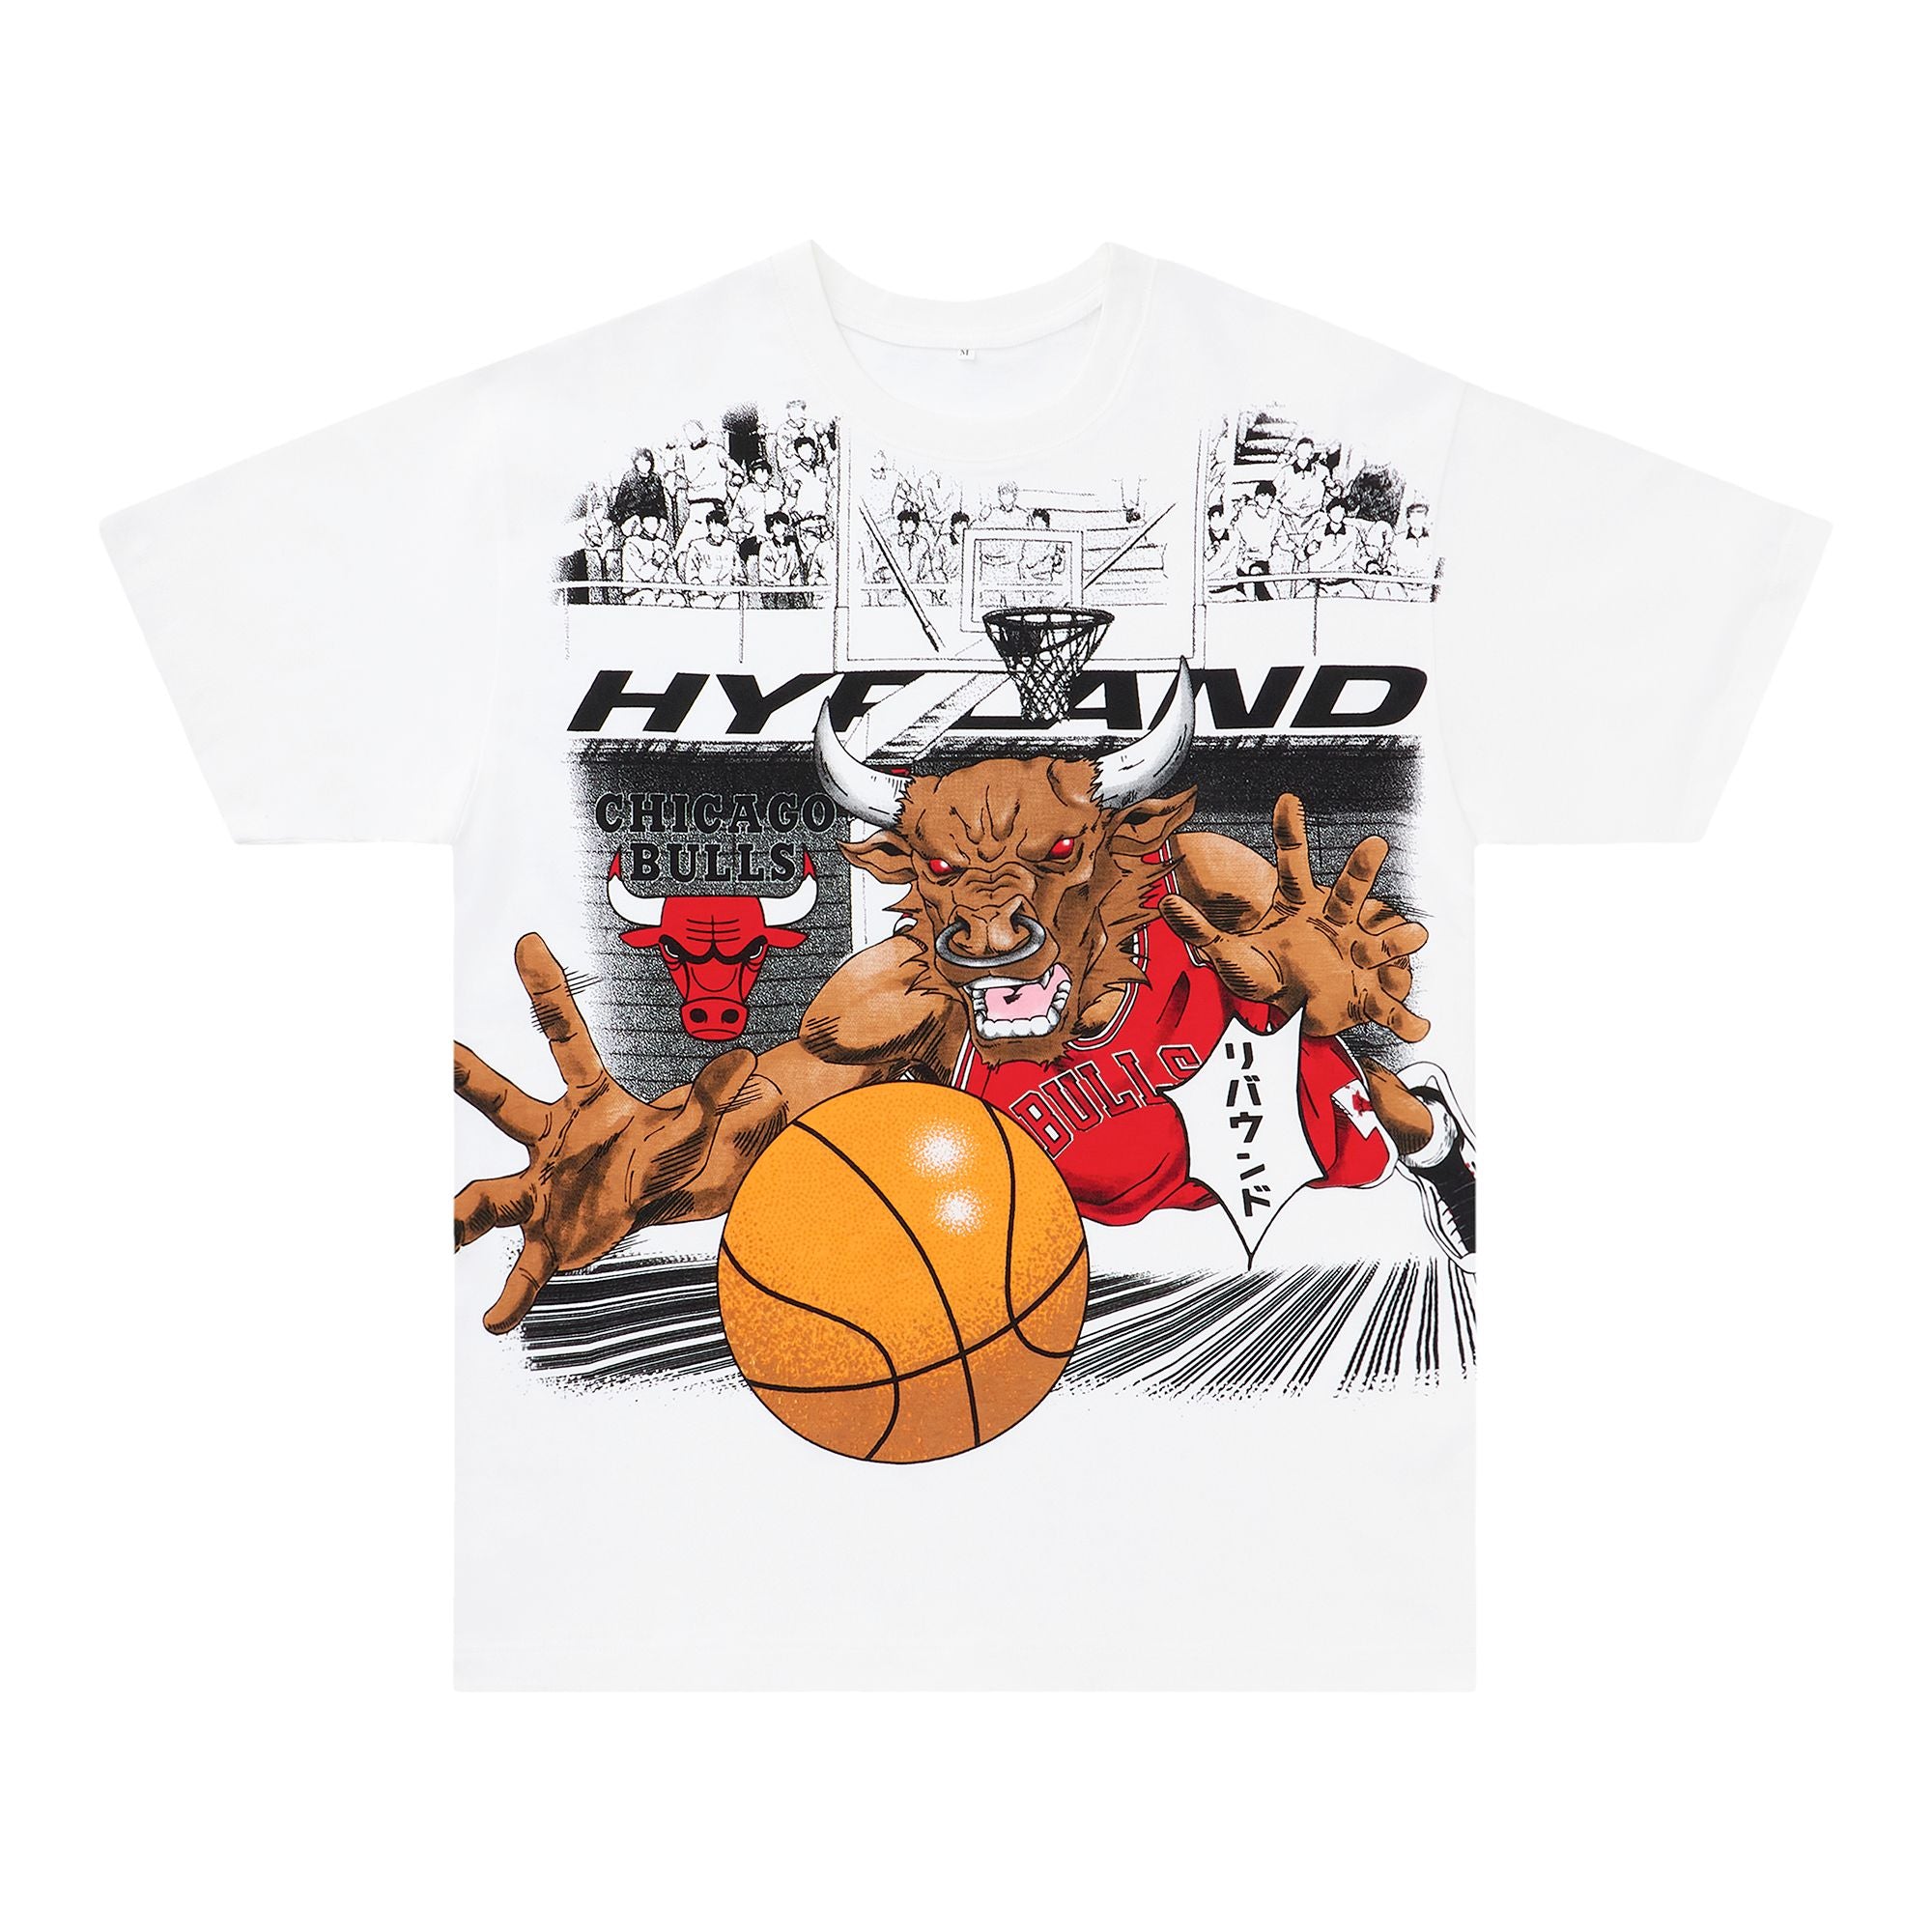 Hypland NBA Chicago Bulls Out of Bounds Tshirt (White) Large